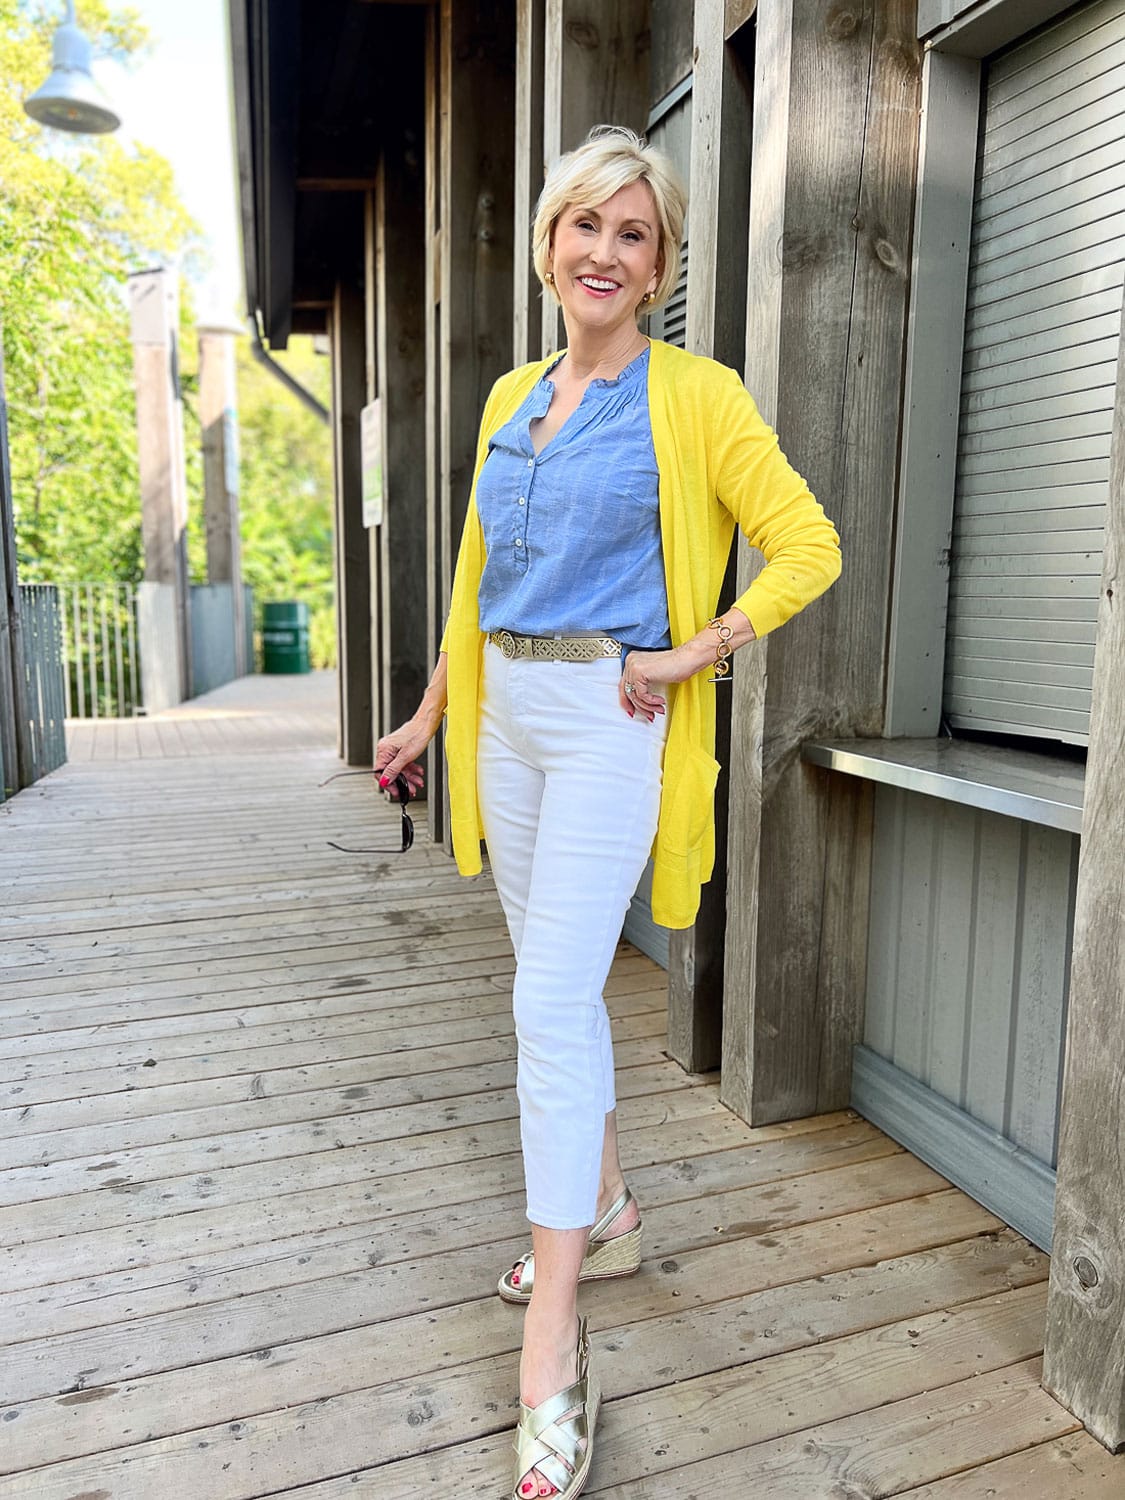 Deborah Boland for Ageless Style in yellow